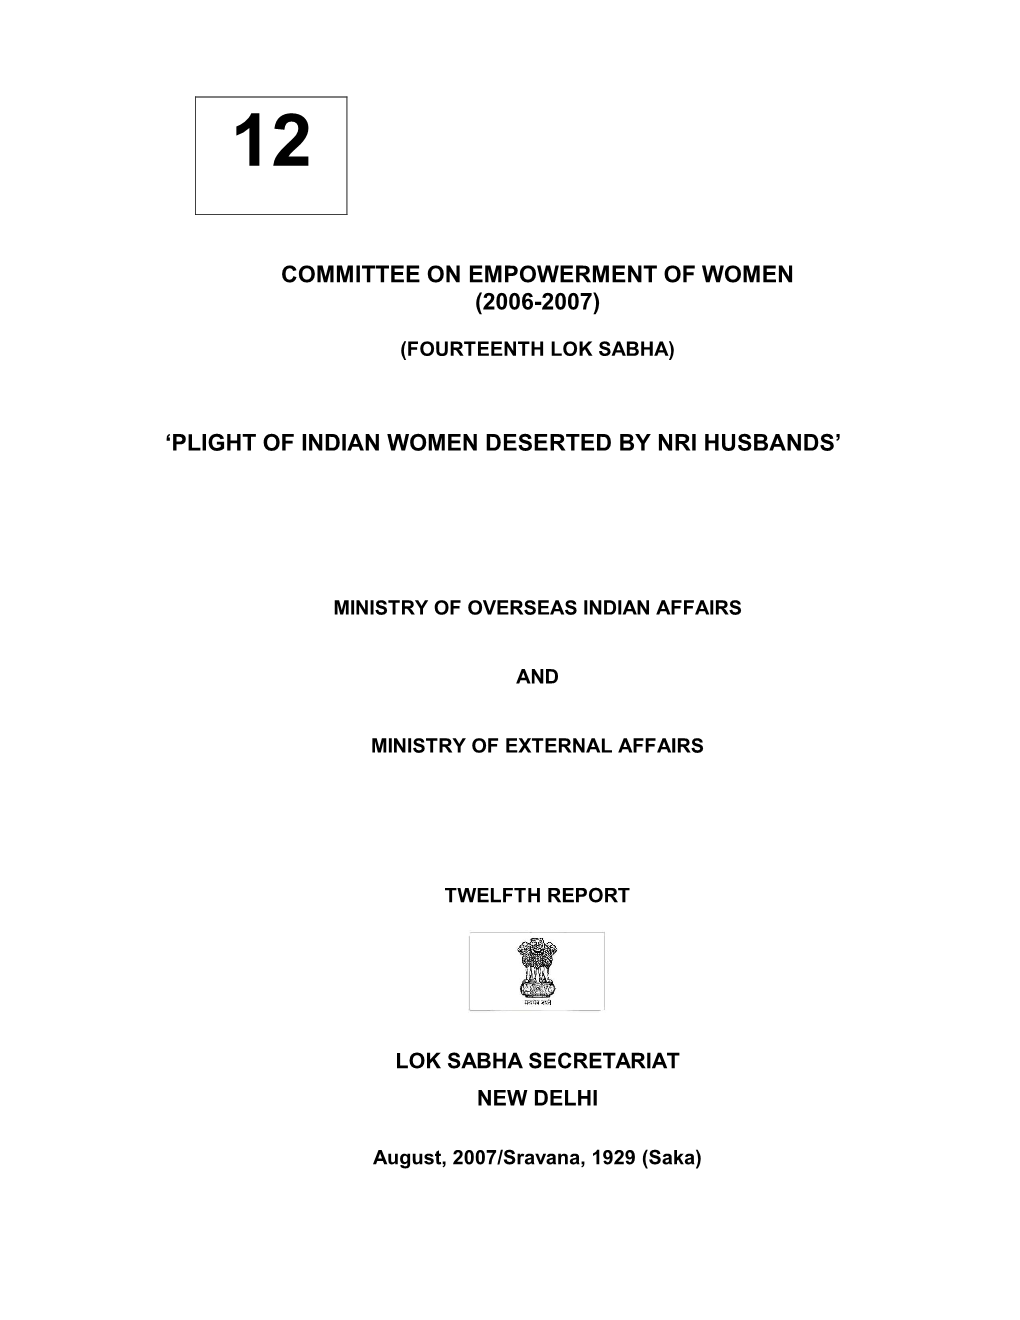 Committee on Empowerment of Women (2006-2007) 'Plight of Indian Women Deserted by Nri Husbands'